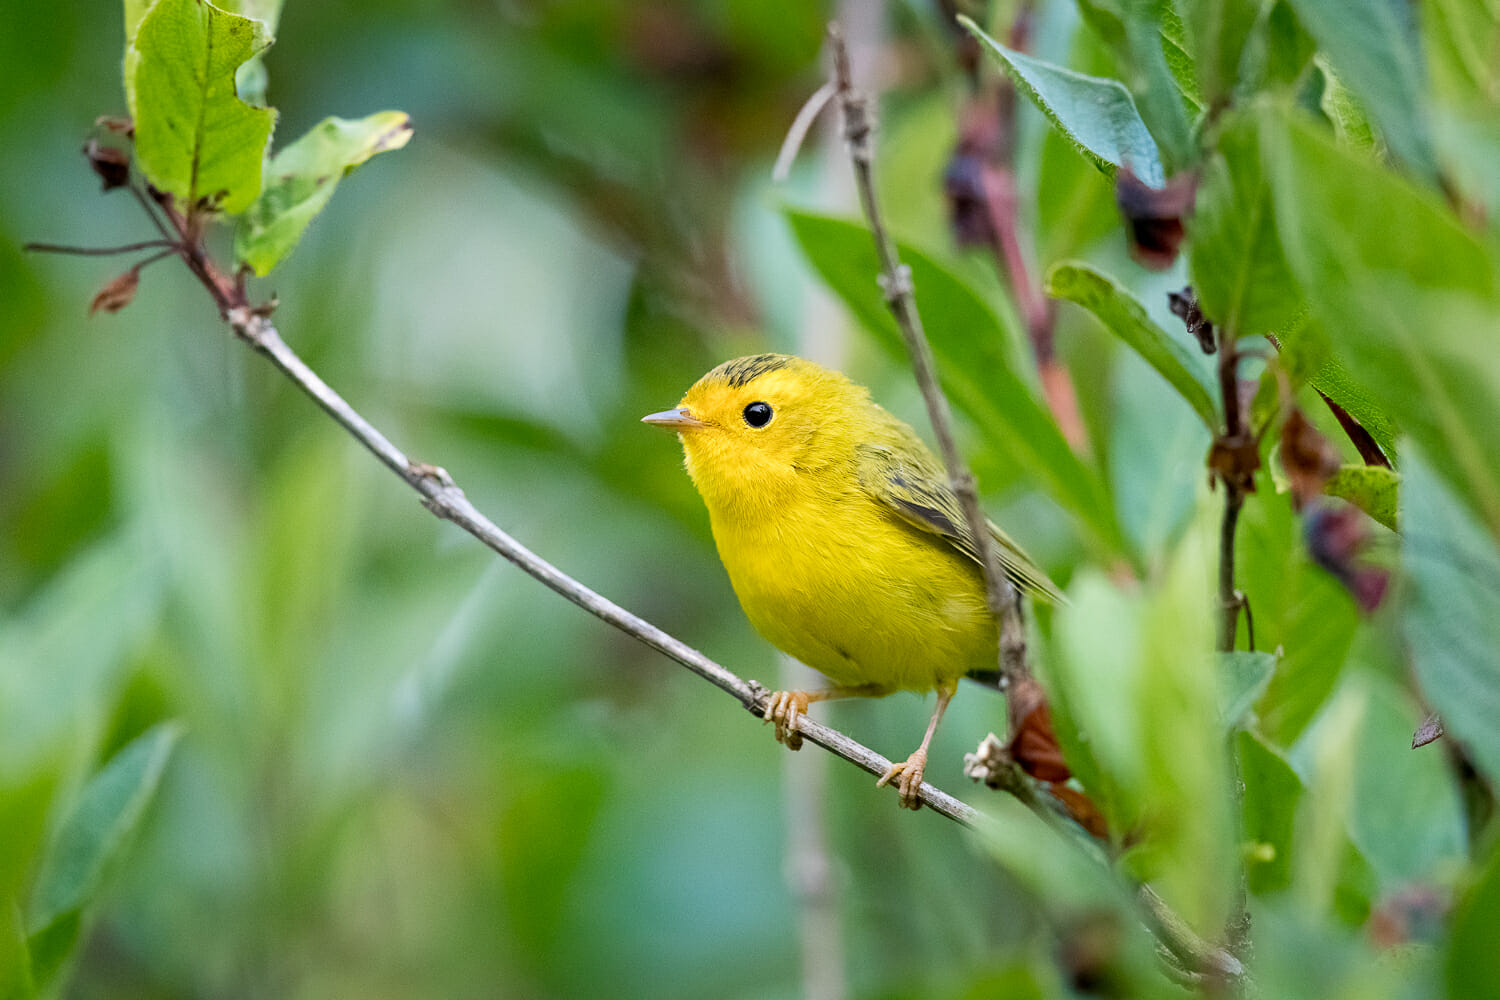 A juvenile Wilson's warbler perched on a branch of green leaves